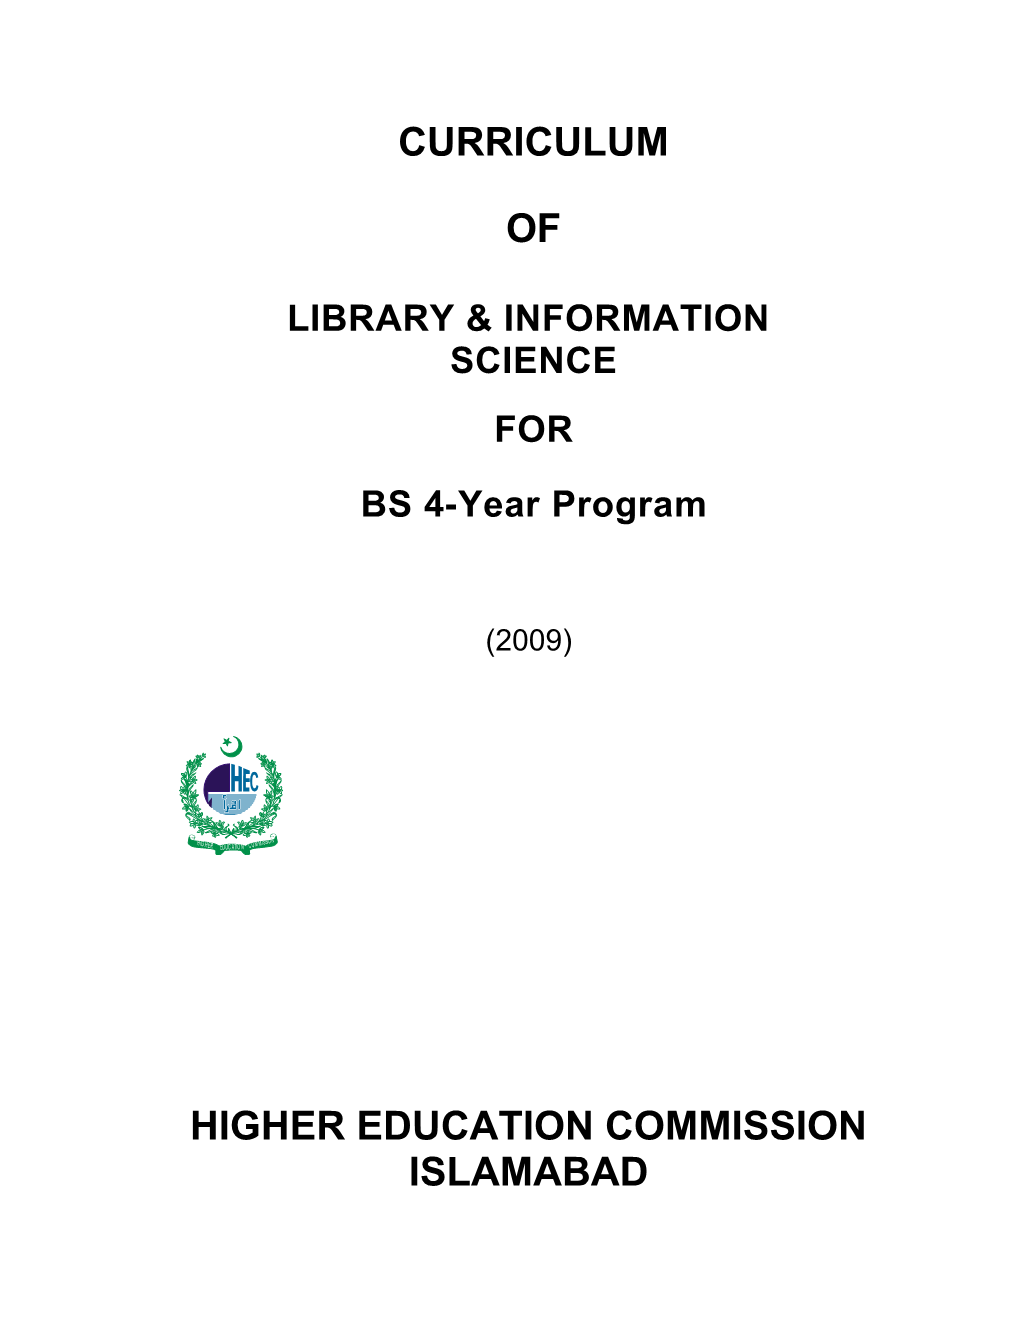 Standardized Format / Scheme of Studies for Four-Year Integrated Curricula for Bachelor